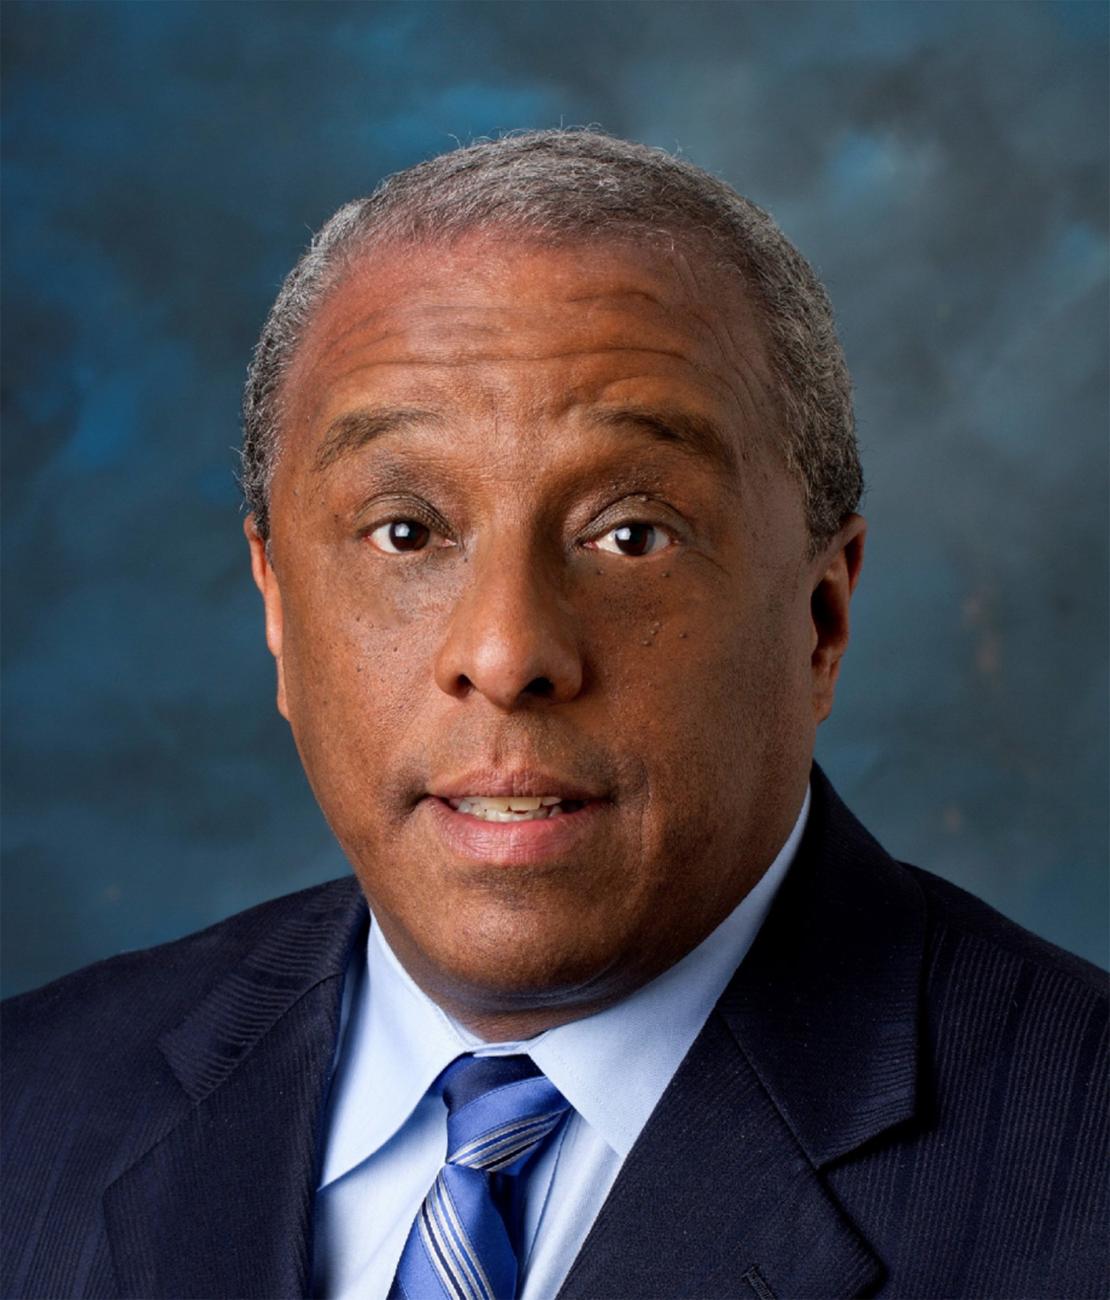 Springfield College welcomes William D. Parham, Ph.D., ABPP, the inaugural Director of the National Basketball Players Association Mental Health and Wellness Program and Professor in the Counseling Program at Loyola Marymount University to the campus on Sept. 24, 2019, at 7:30 p.m., in the Fuller Arts Center.